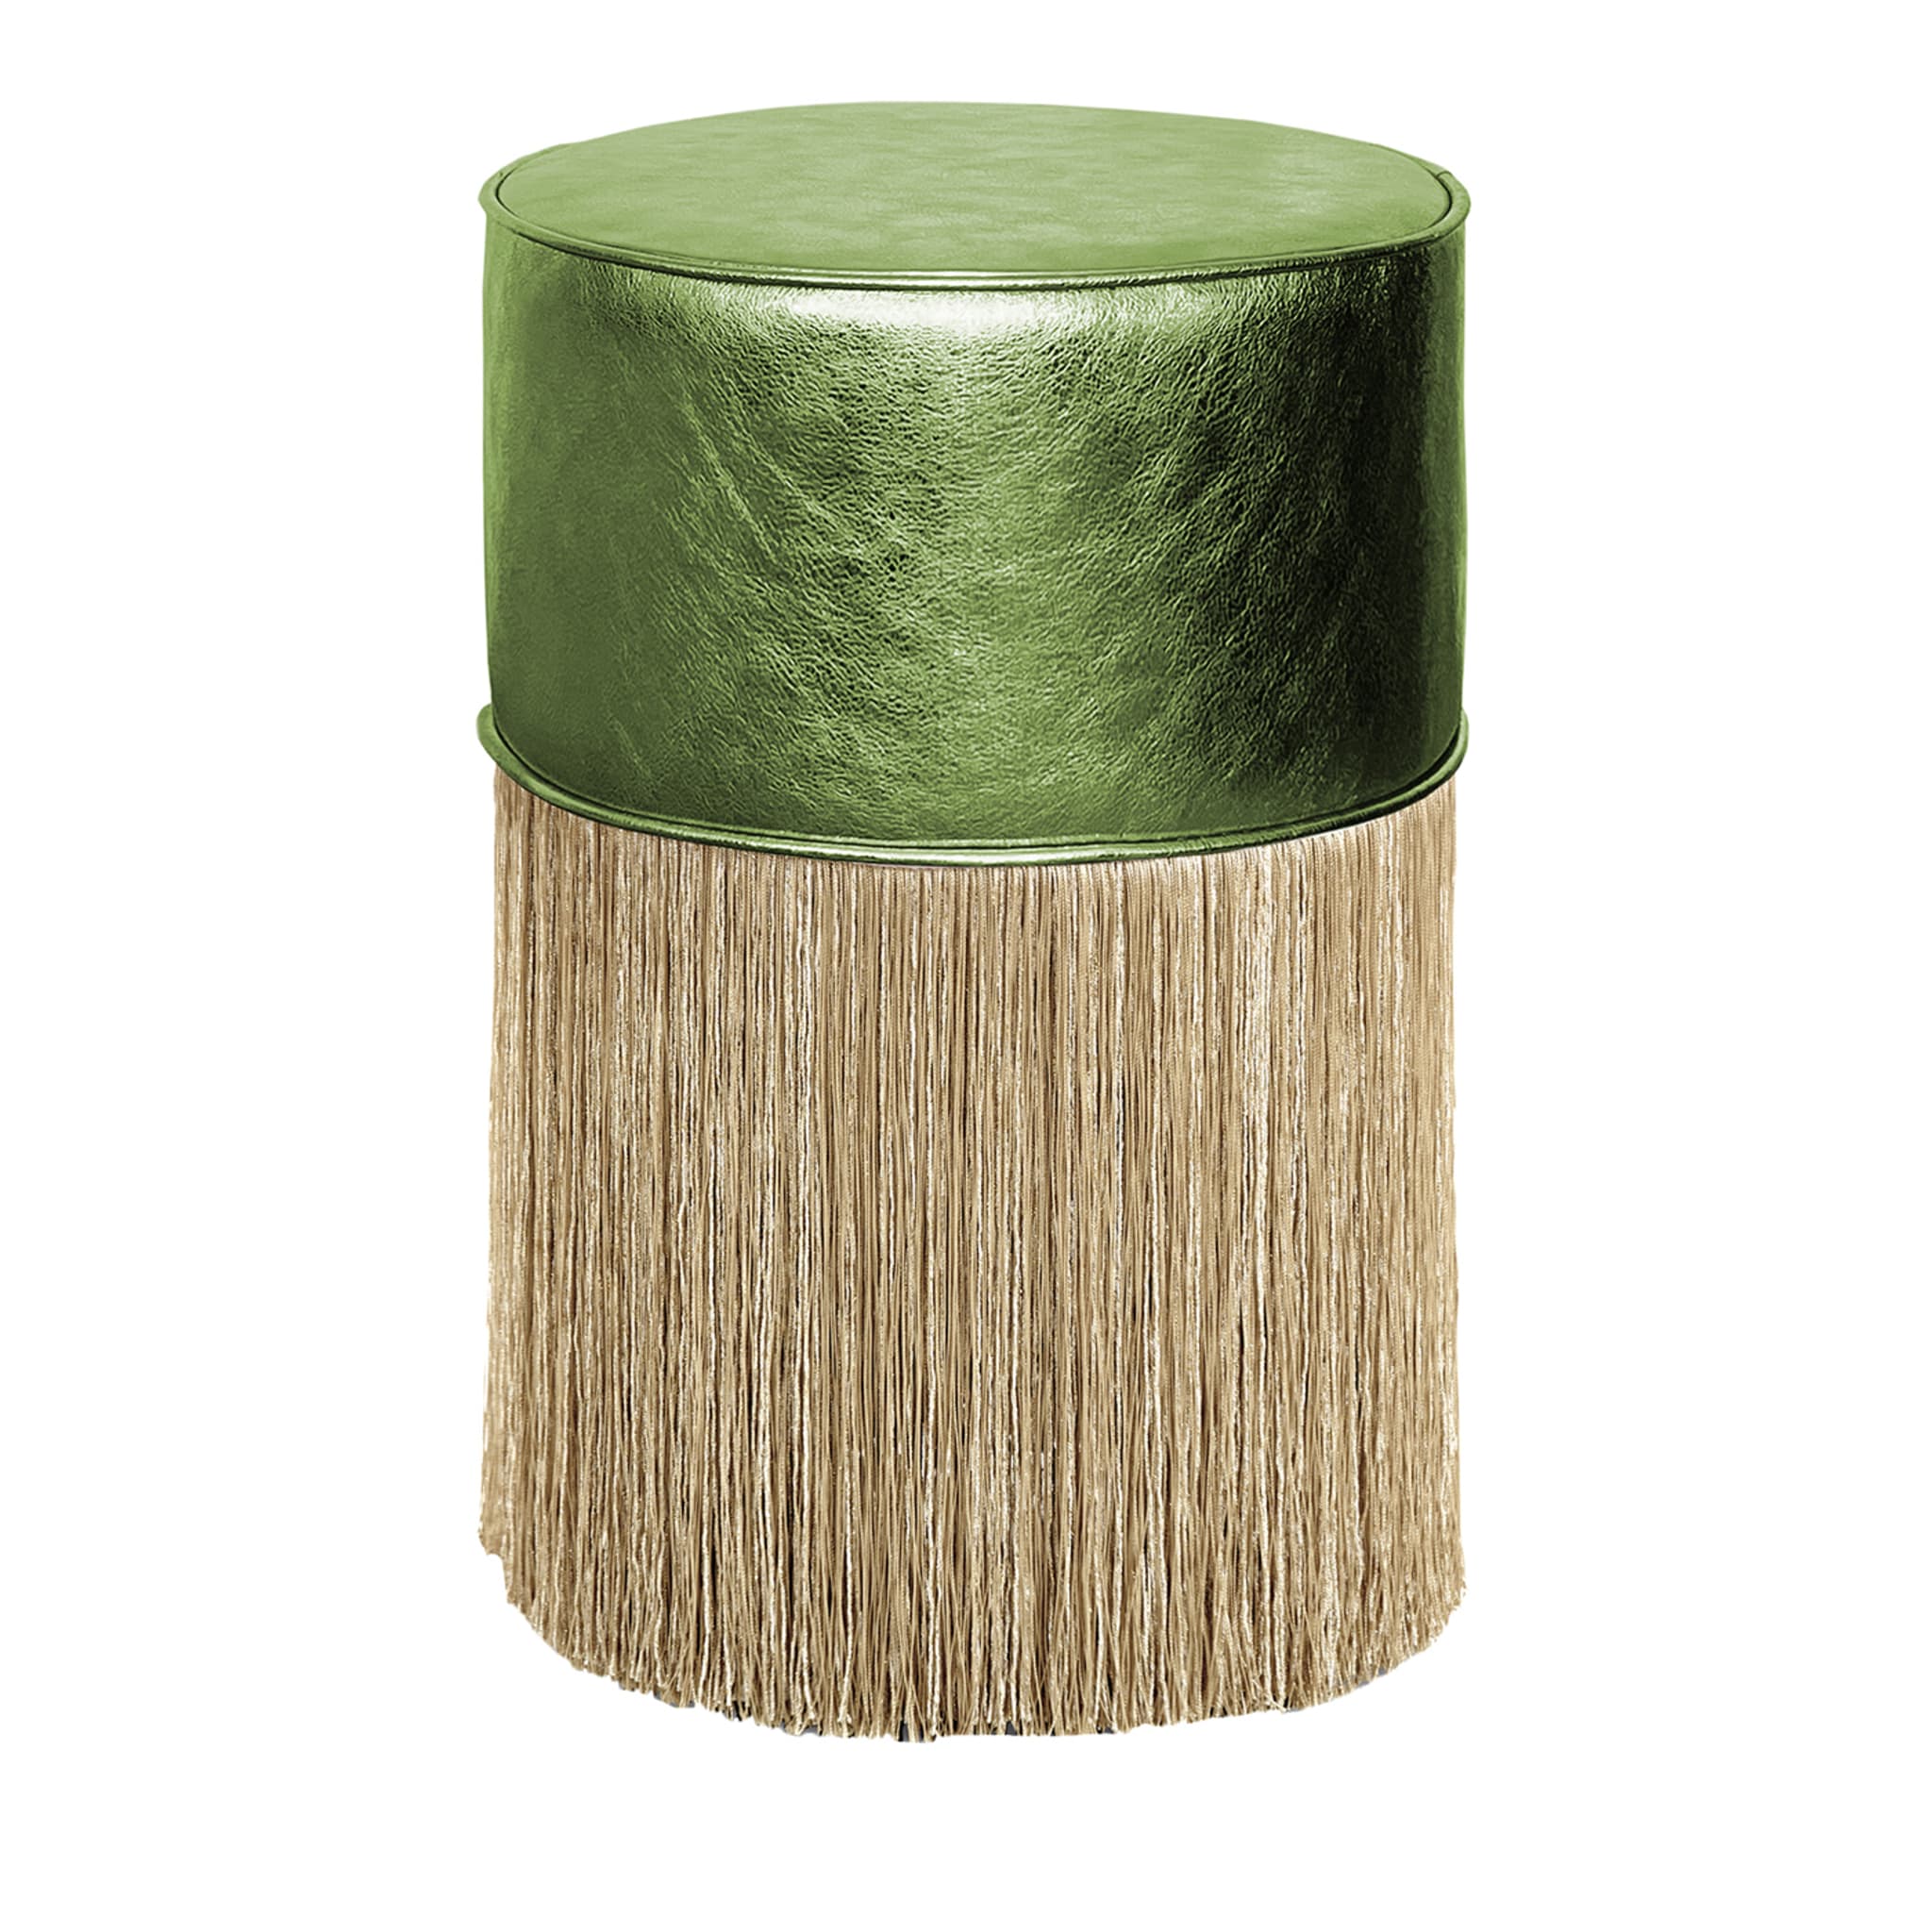 Gleaming Green Leather Gold Fringes Pouf by Lorenza Bozzoli - Main view